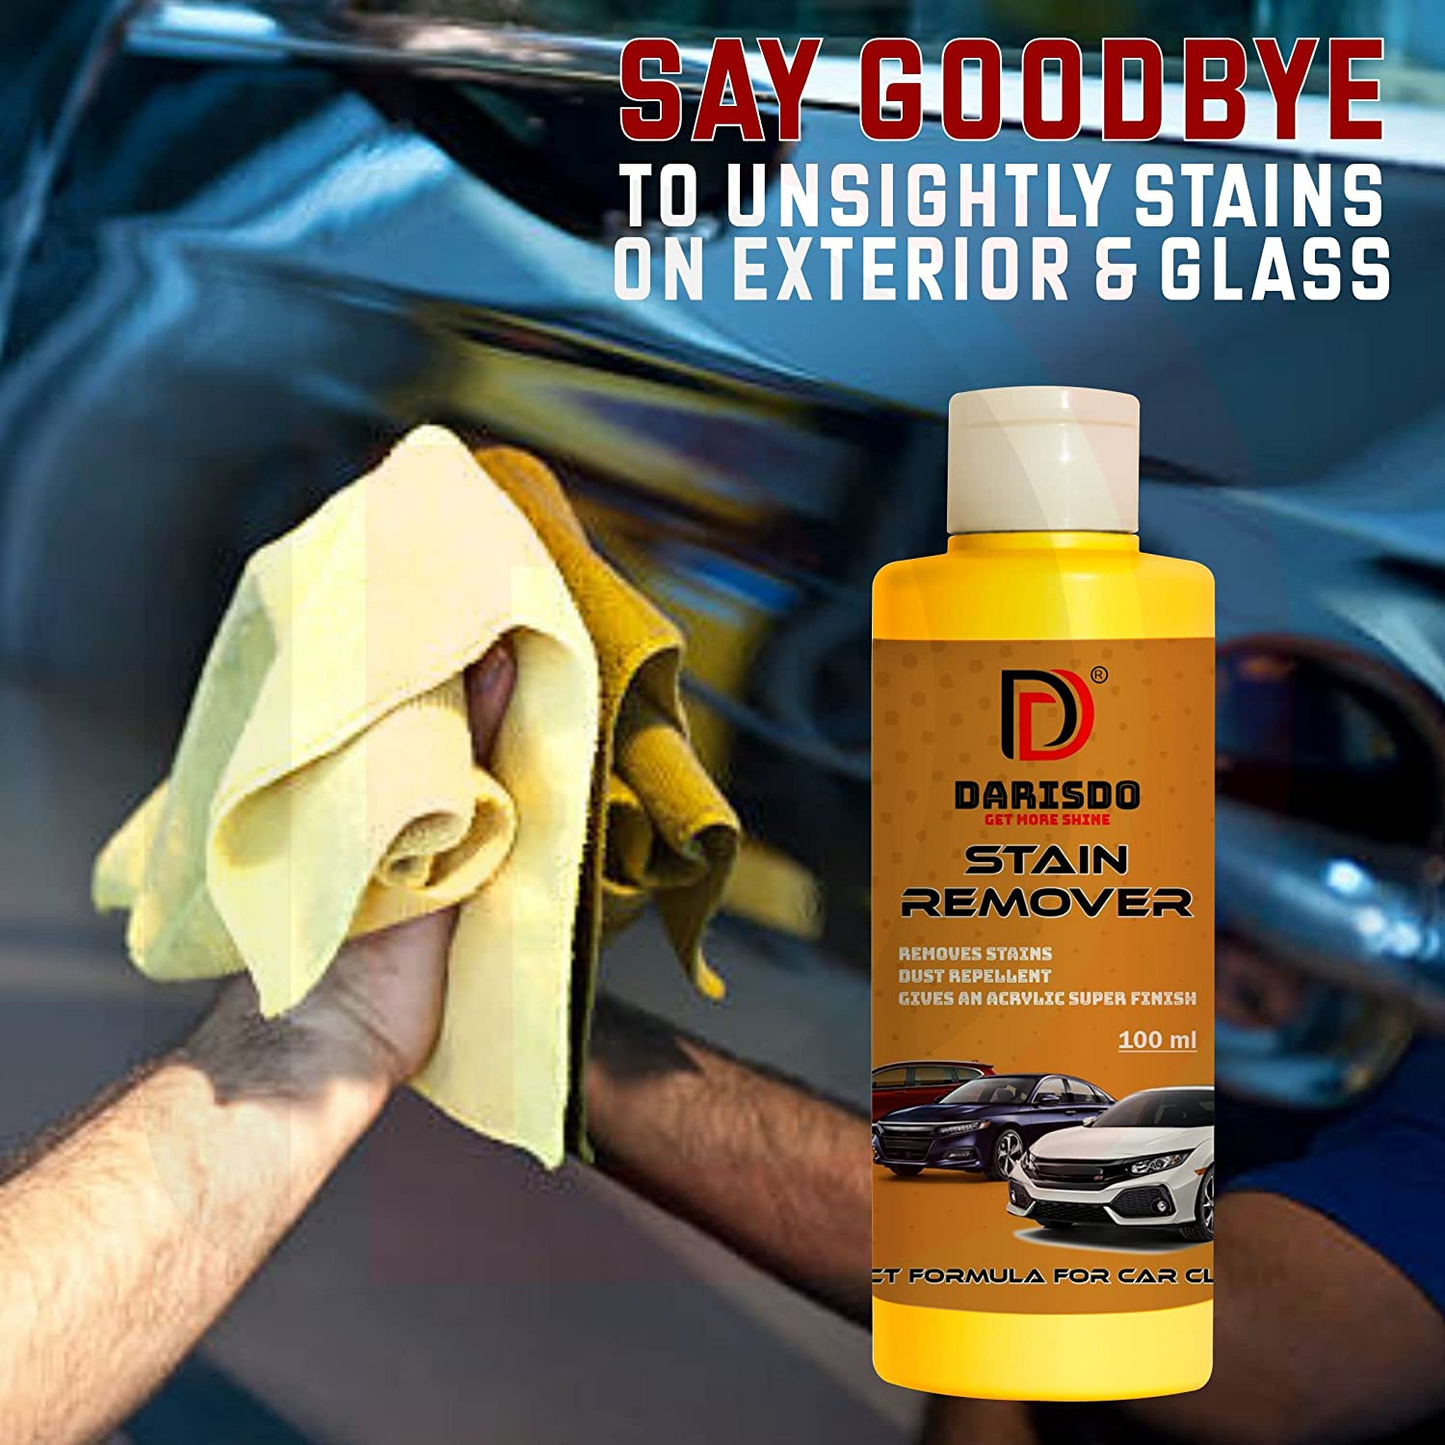 Darisdo Ultimate Car Scratch Remover - Polish & Paint Restorer - Easily Repair Paint Scratches, Water Spots Stain/Scratch Remover (100 ml)